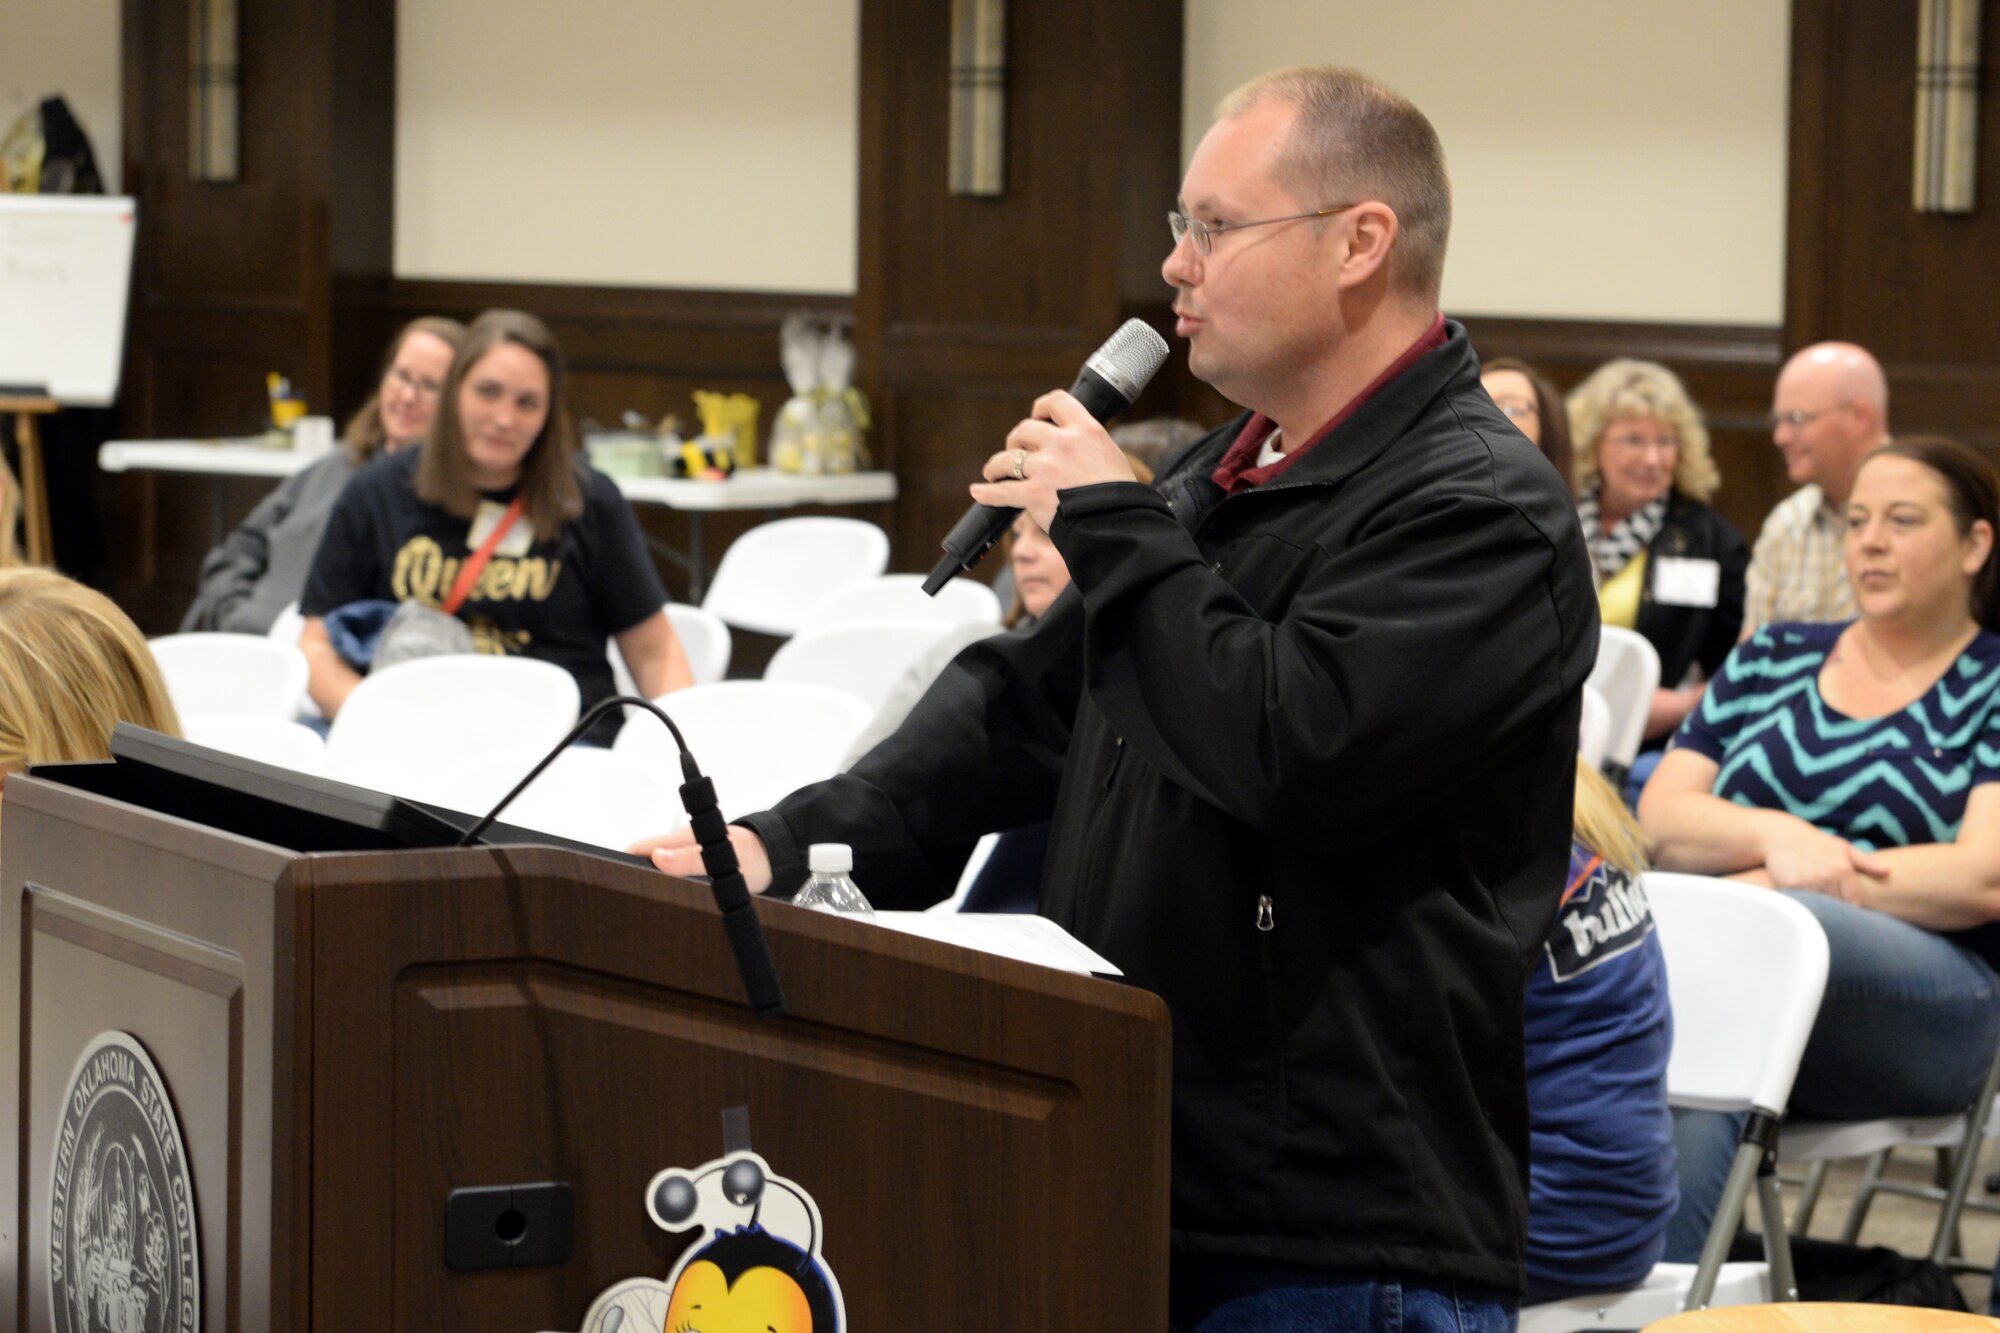 U.S. Air Force Lt. Col. Jeremy Braswell, 97th Medical Support Squadron commander, pronounces words during the “Grate” Altus Spelling Bee, April 7, 2018, at Western Oklahoma State College, Altus, Okla.